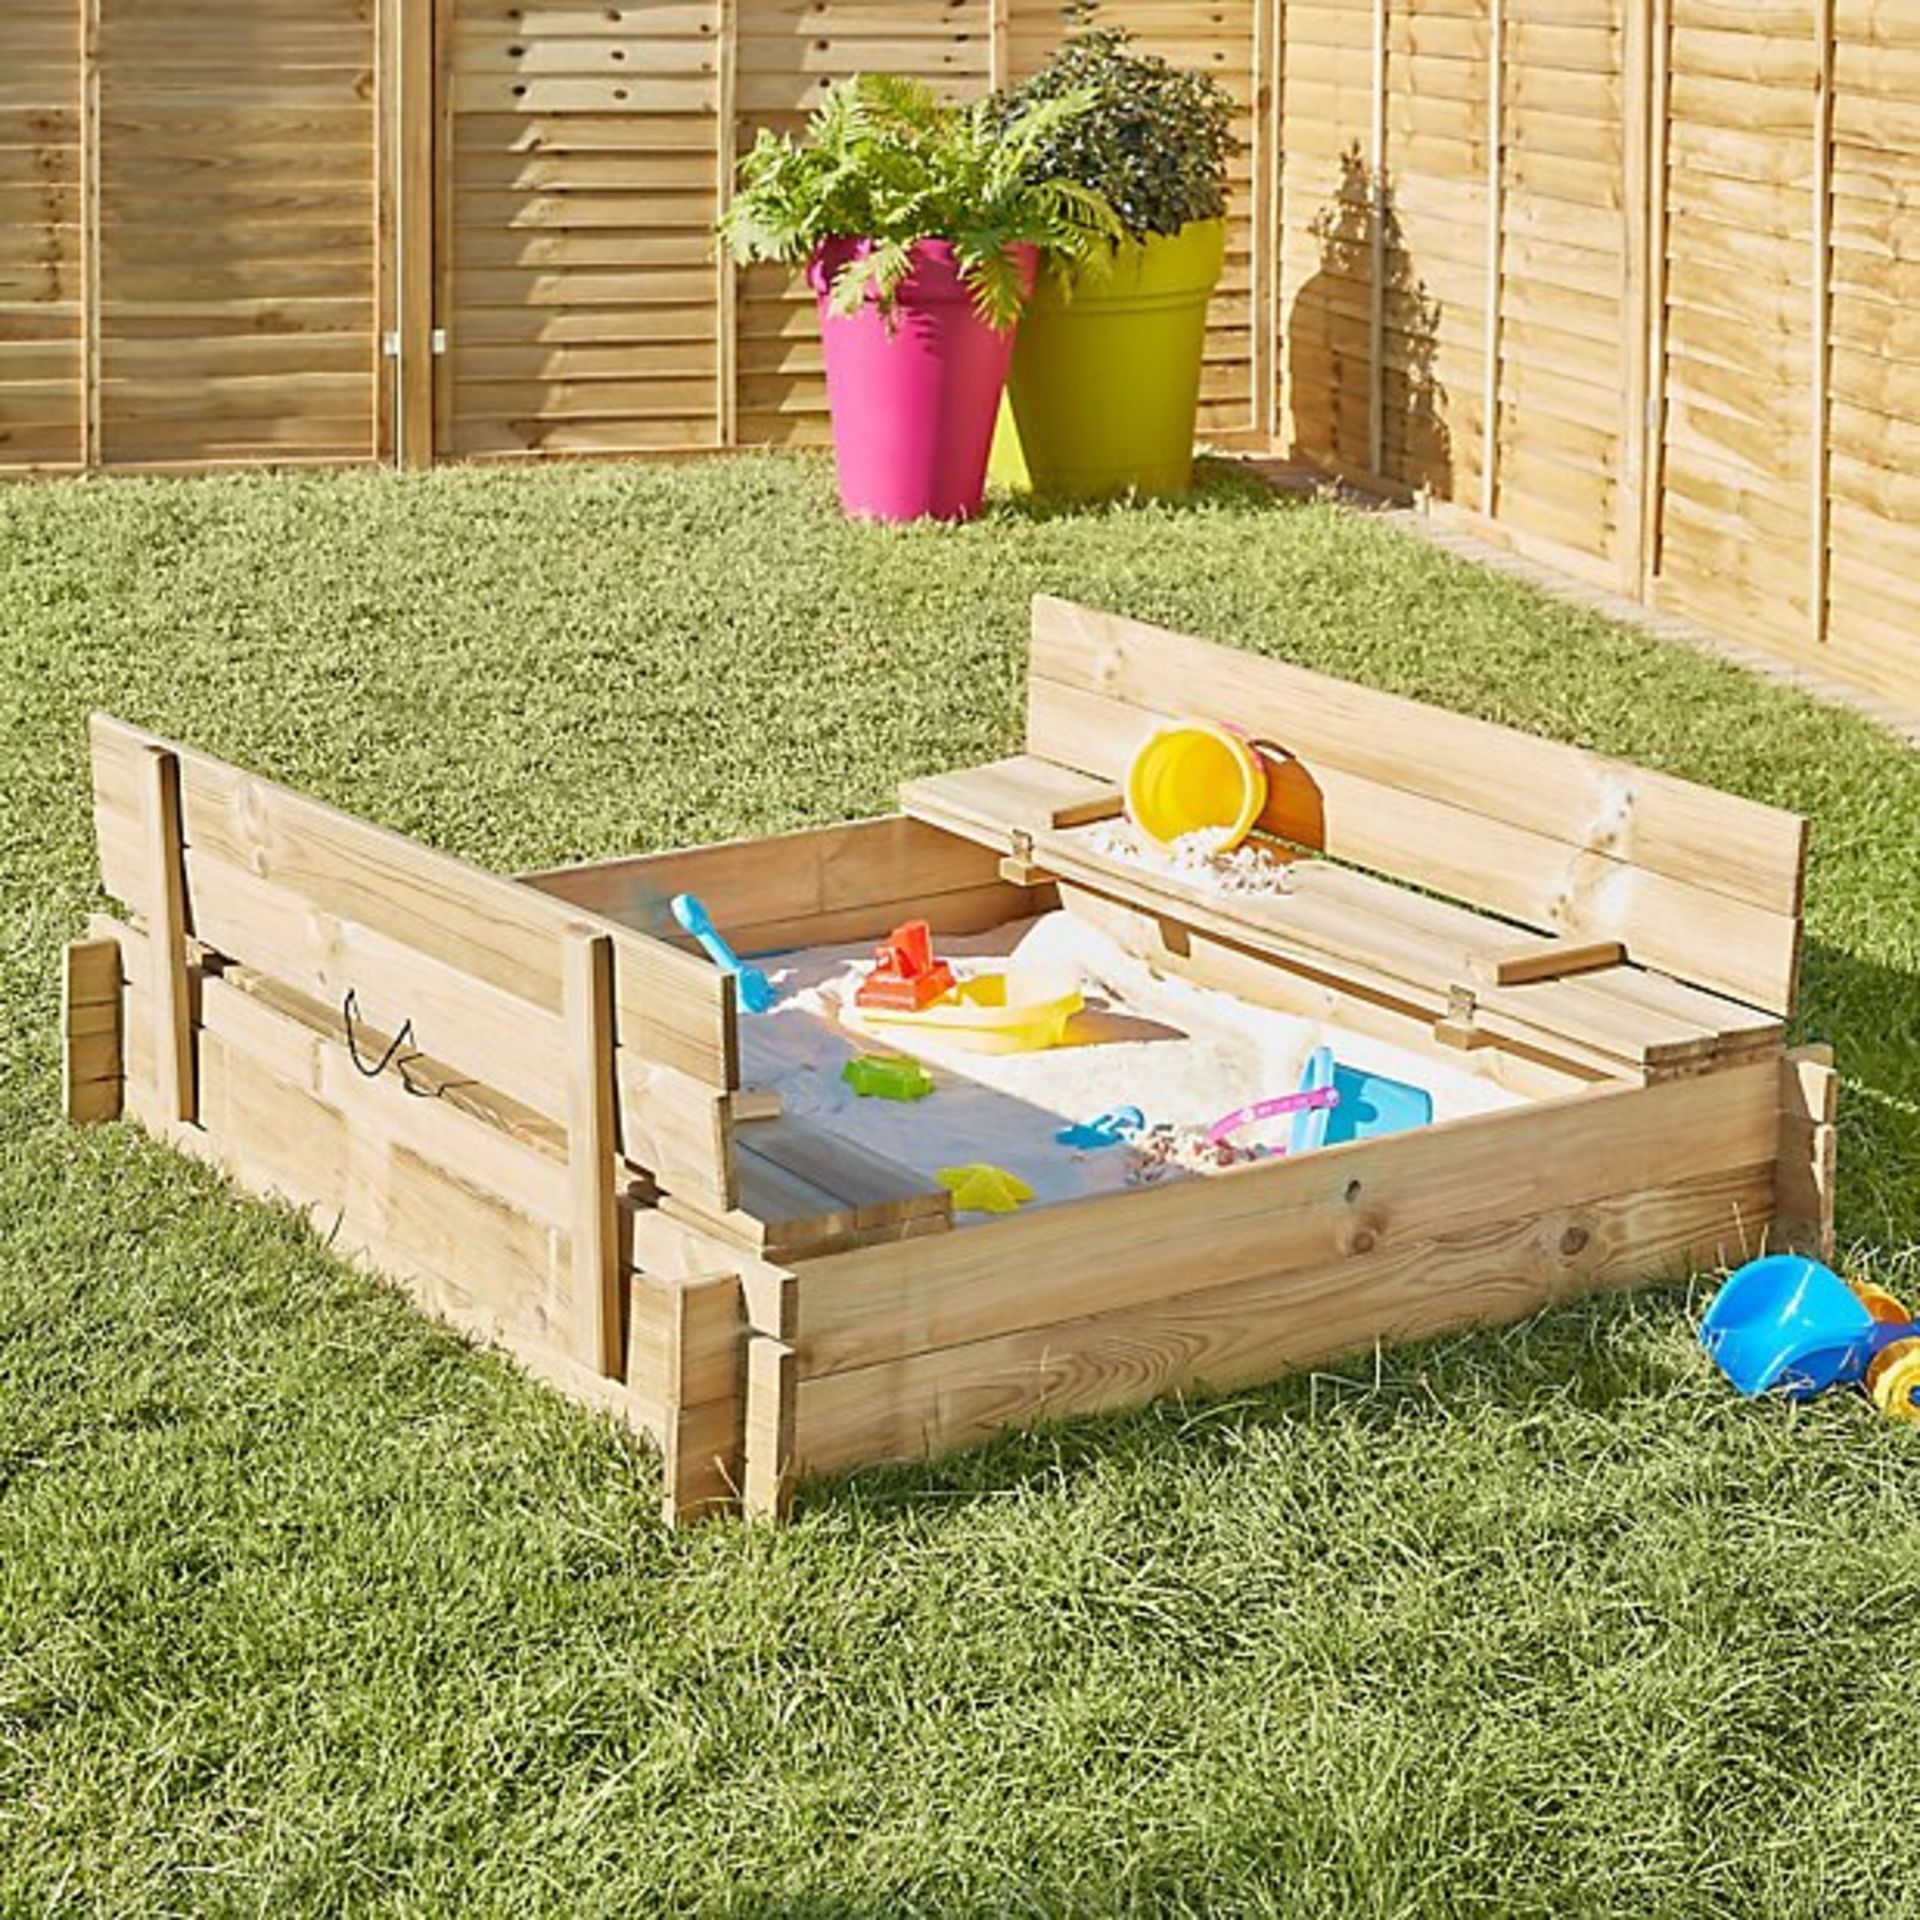 2 x NEW BLOOMA KIDS WOODEN SAND PIT BENCHES - SIZE: 120(W)x120(D)x20(H)CM.